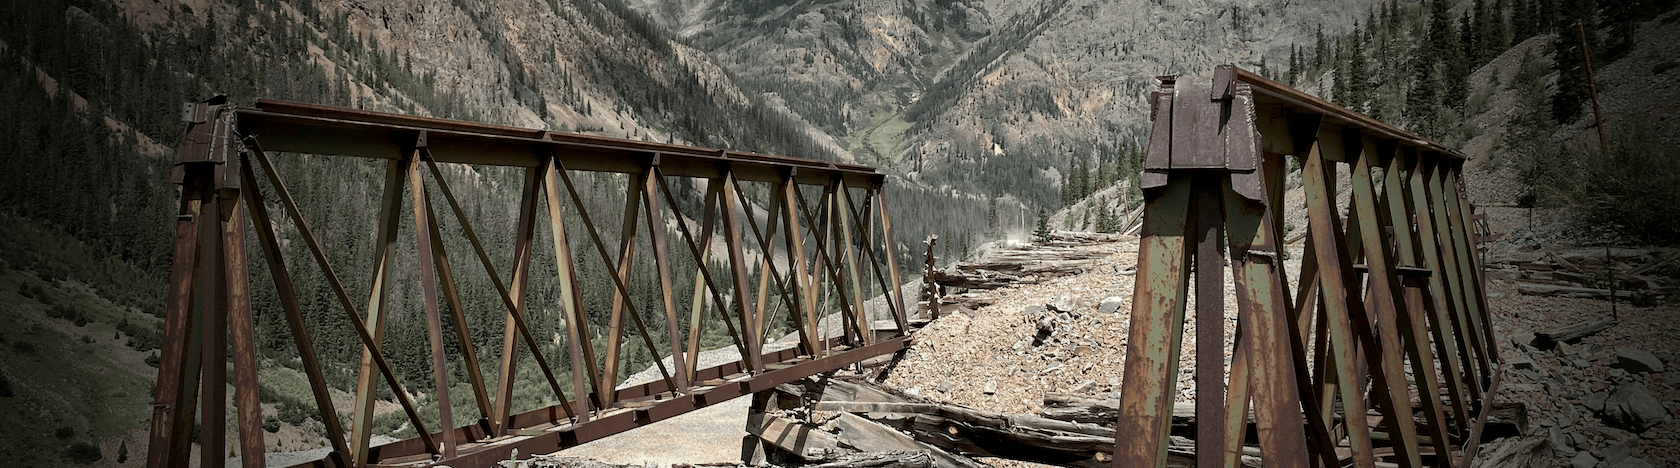 A rusted trestle bridge in a high-altitude Rocky Mountain view